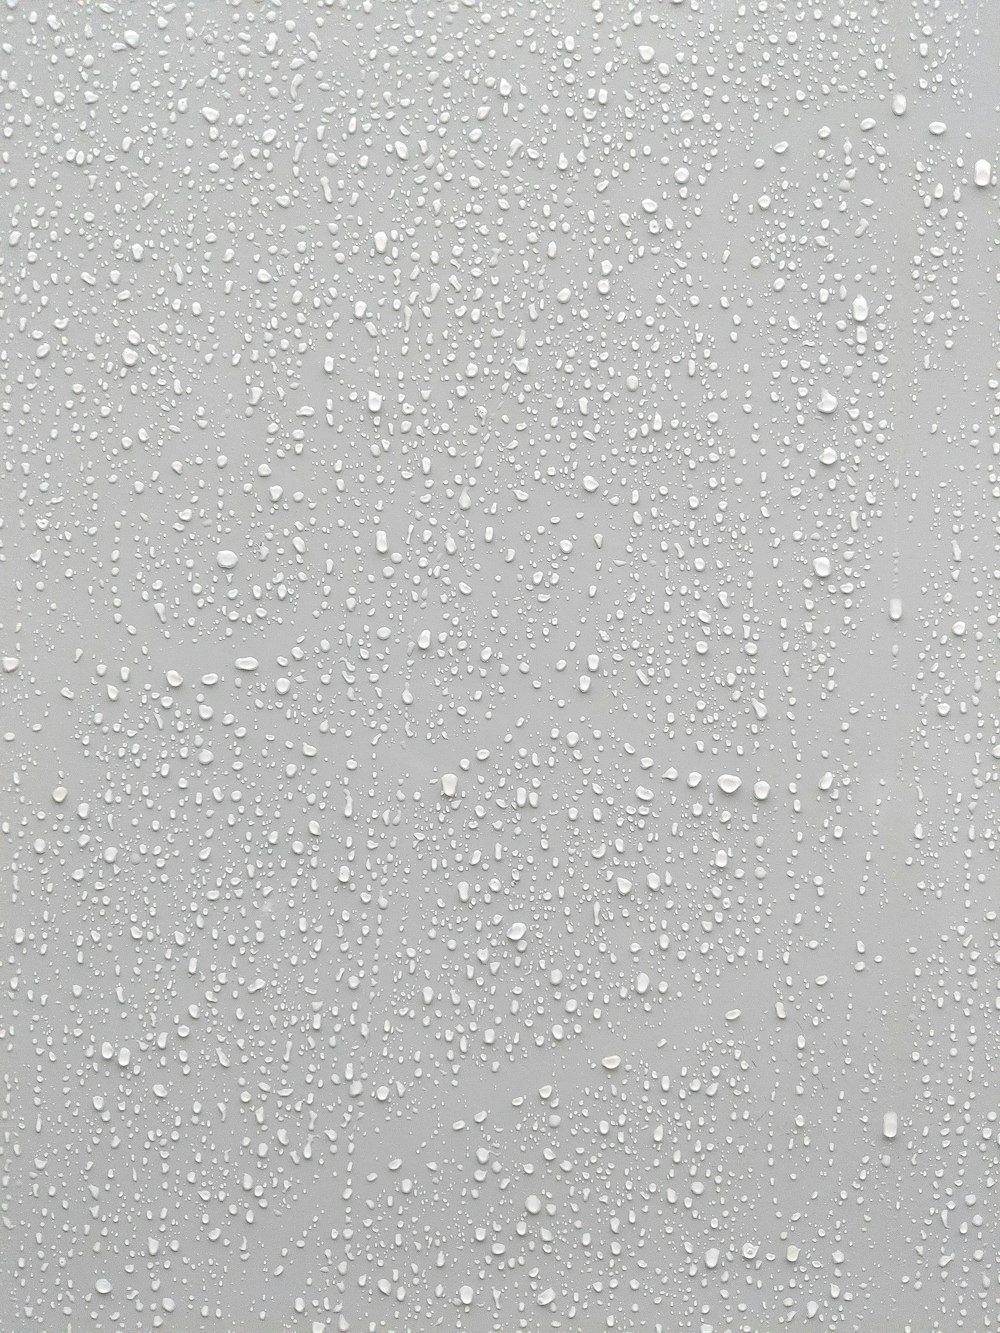 water drops on a glass surface with a white background